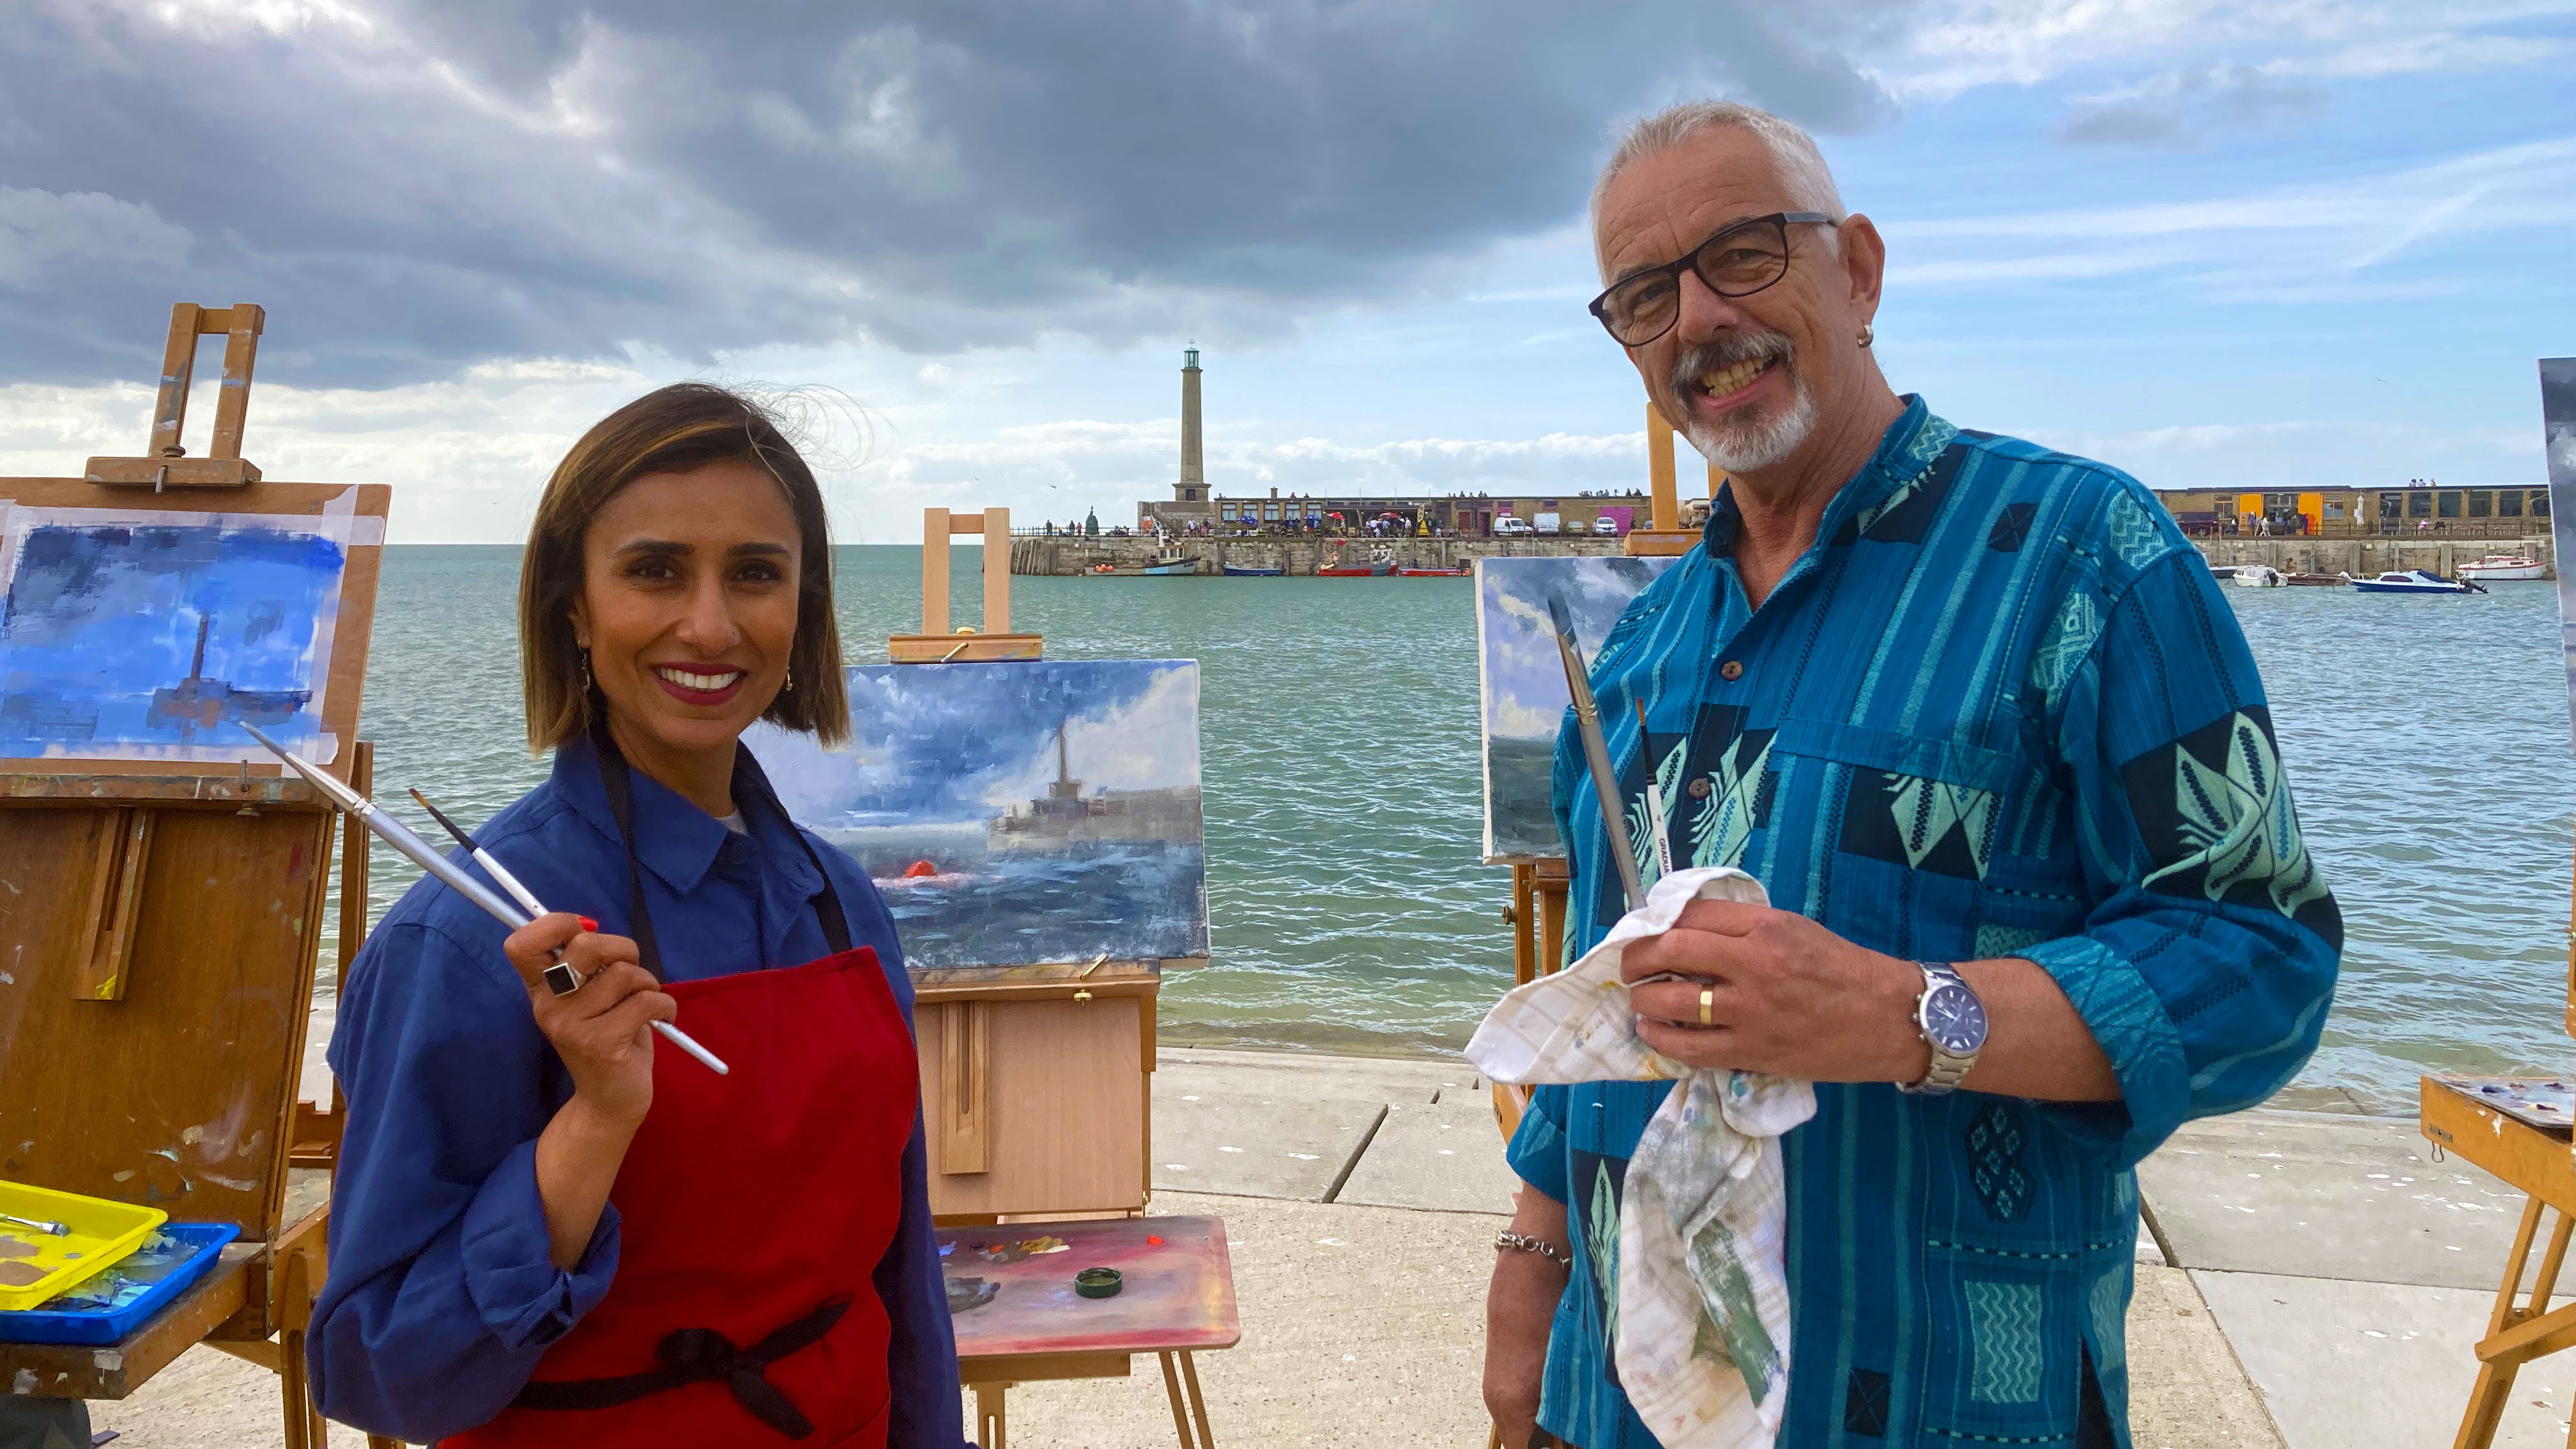 Anita tries her hand at oil painting for the first time, producing her own J.M.W. Turner-inspired seascape.